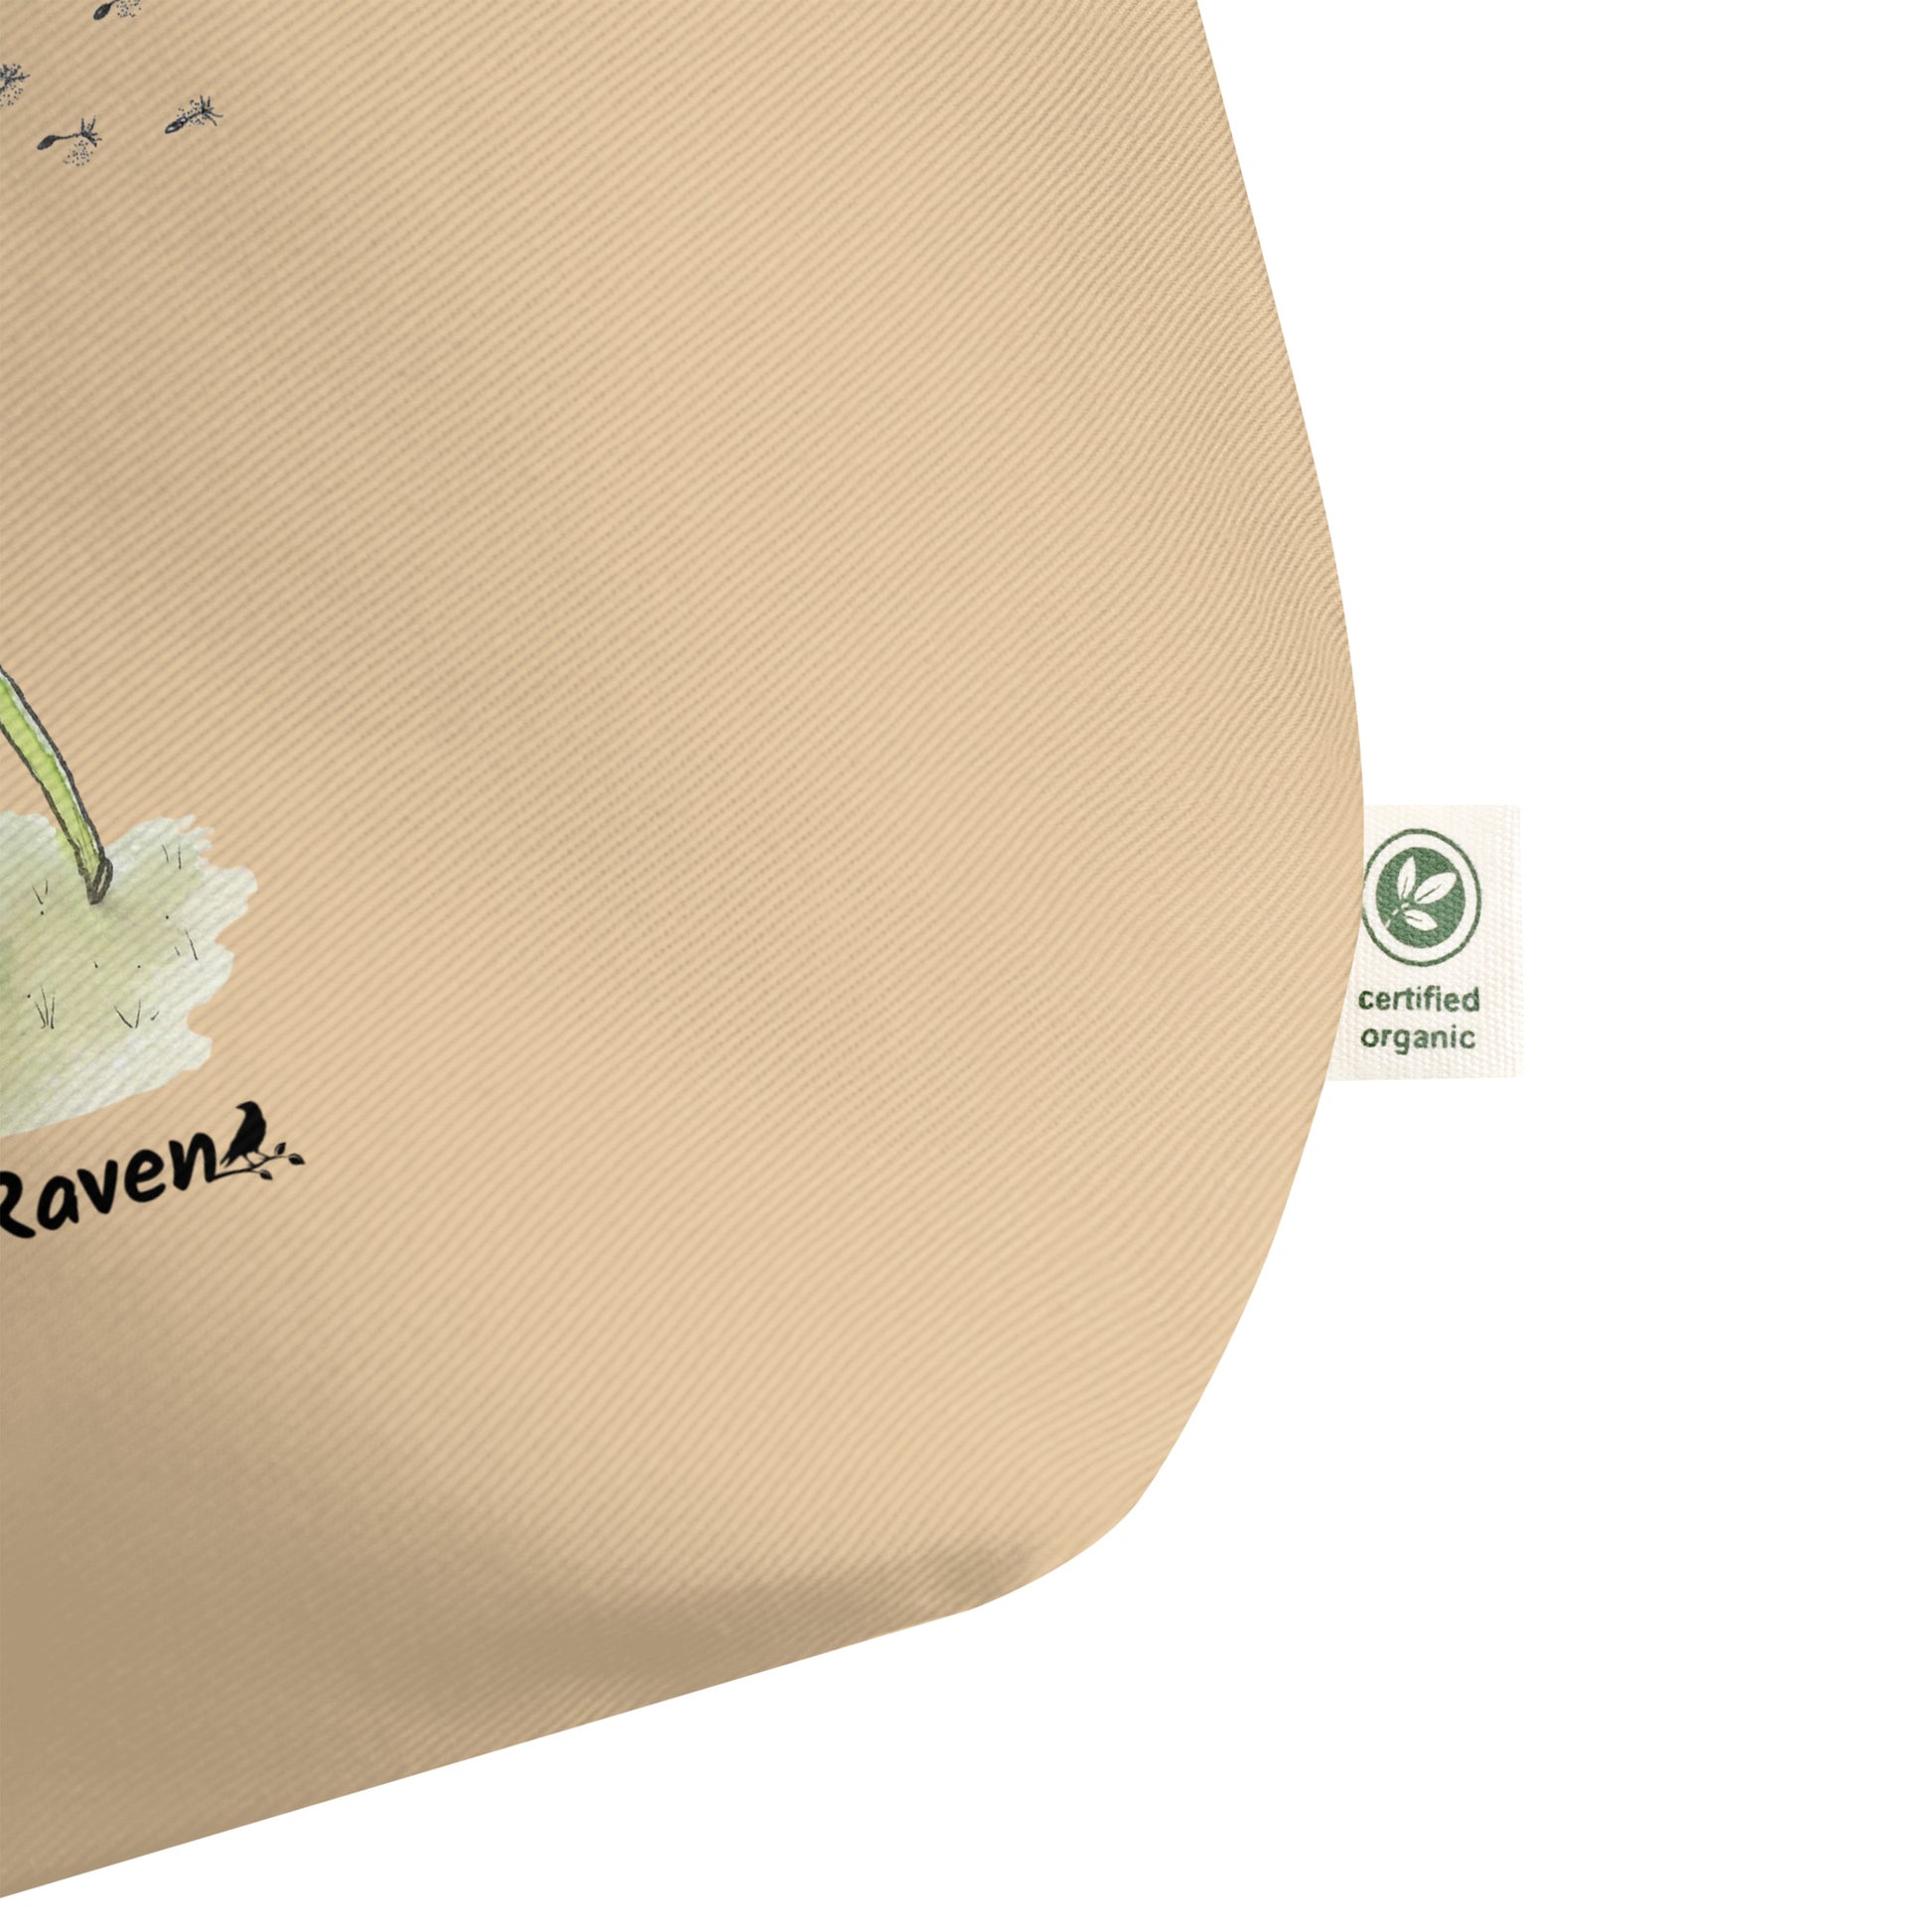 Eco tote oyster-colored bag details. Certified organic tag.